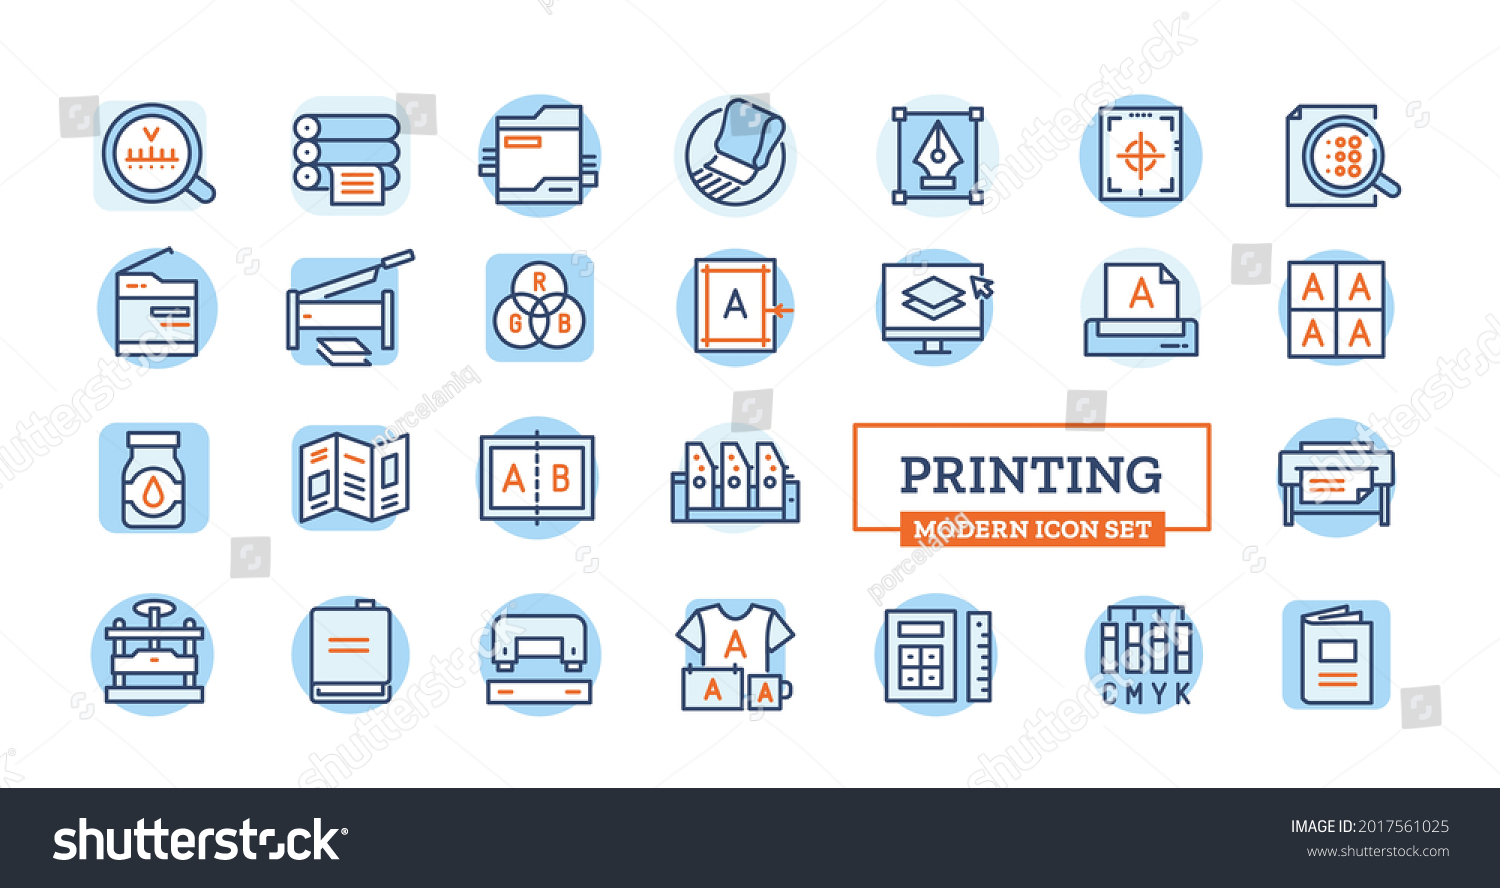 SVG of Vector print production and poligraphy modern icons with thin line stroke and colorful details.  svg